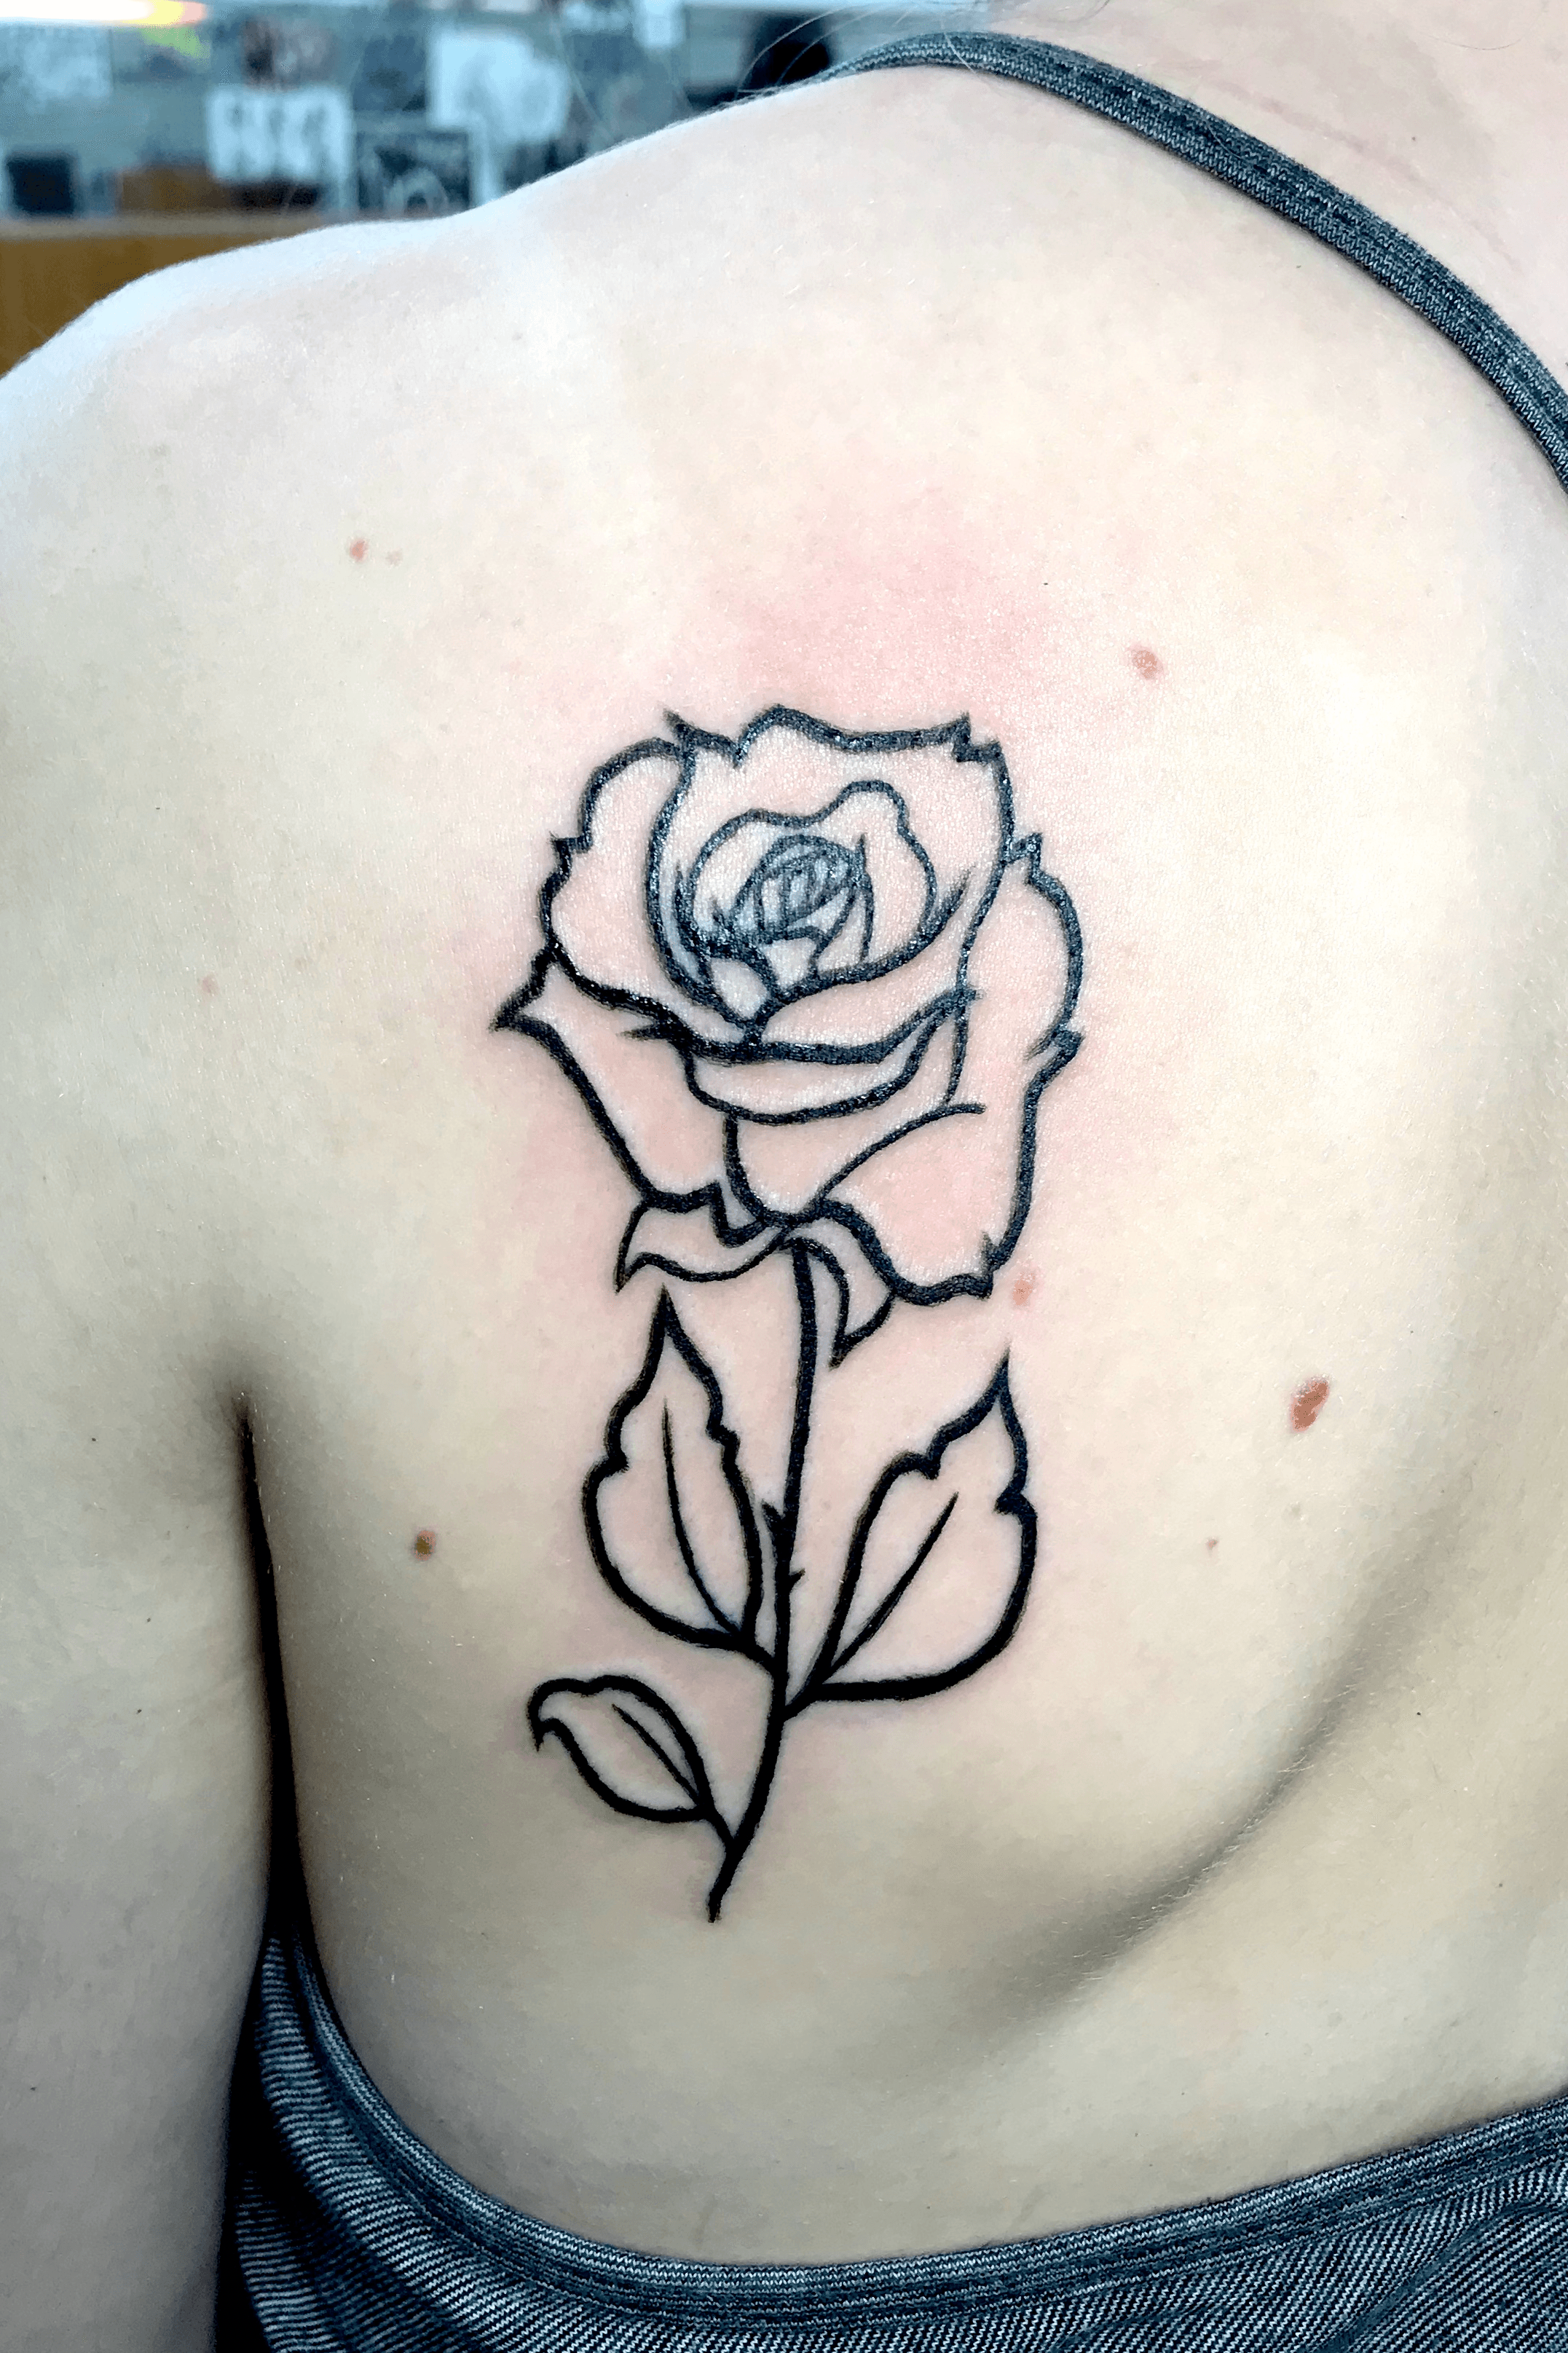 Mini rose tattoo done on the inner forearm